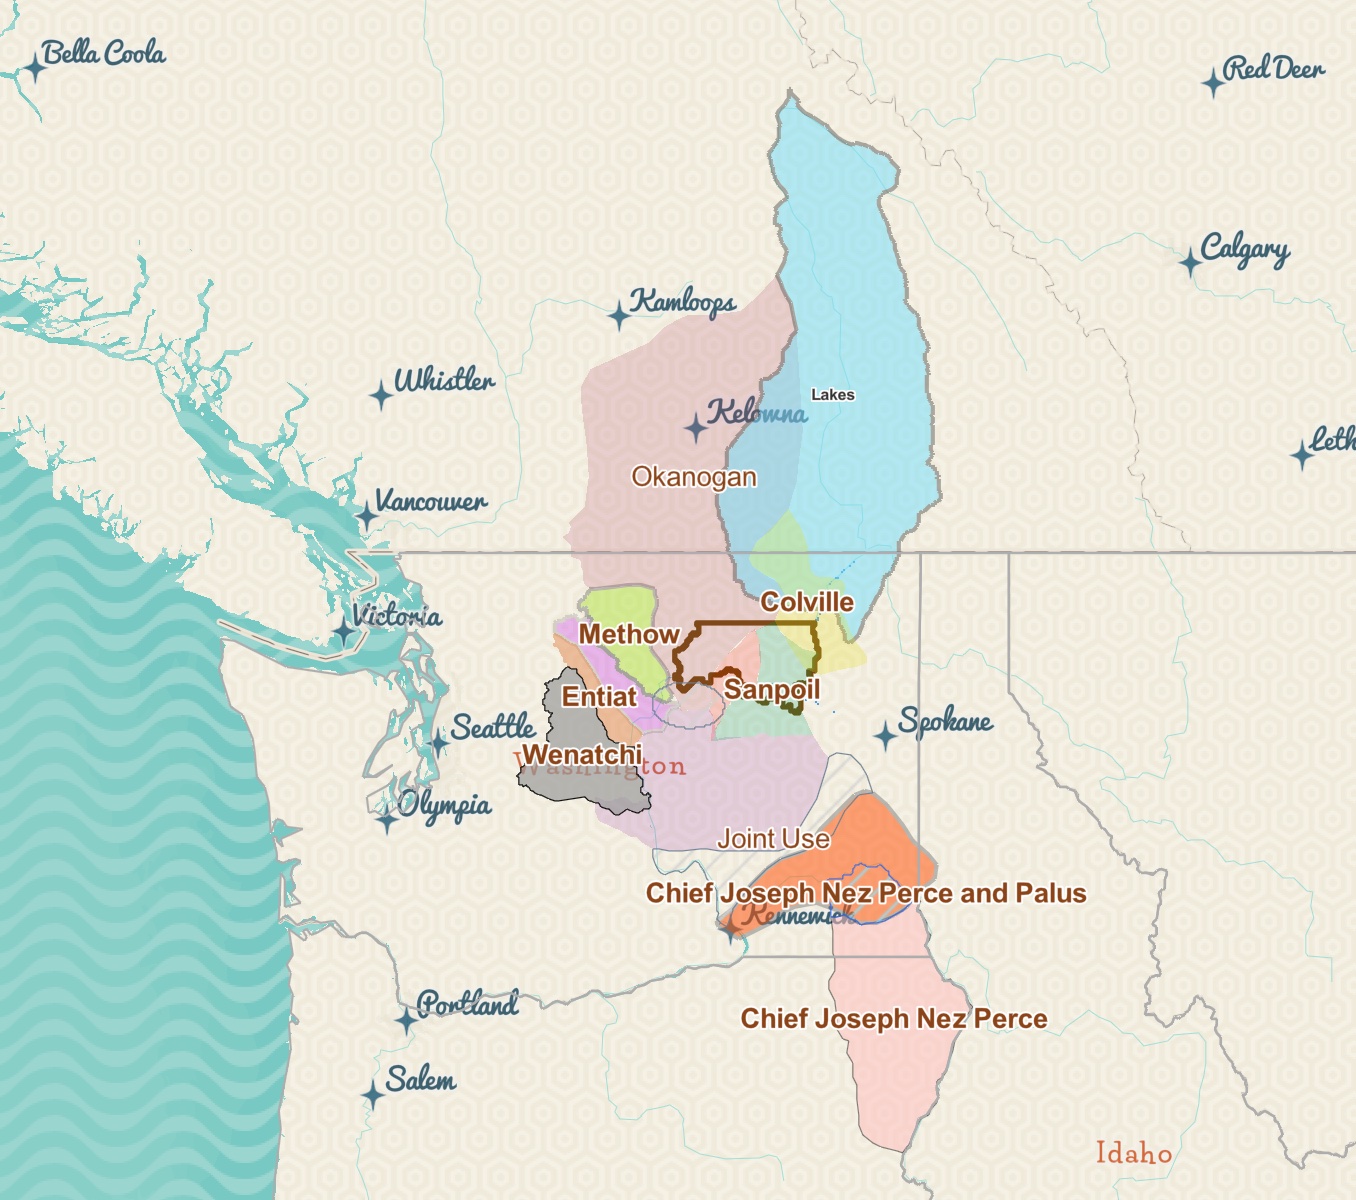 Map of Traditional Colville Tribe Territories. Confederated Tribes of the Colville Reservation, The History and Archaeology Program, Trisha Johnson. June 16, 2021.